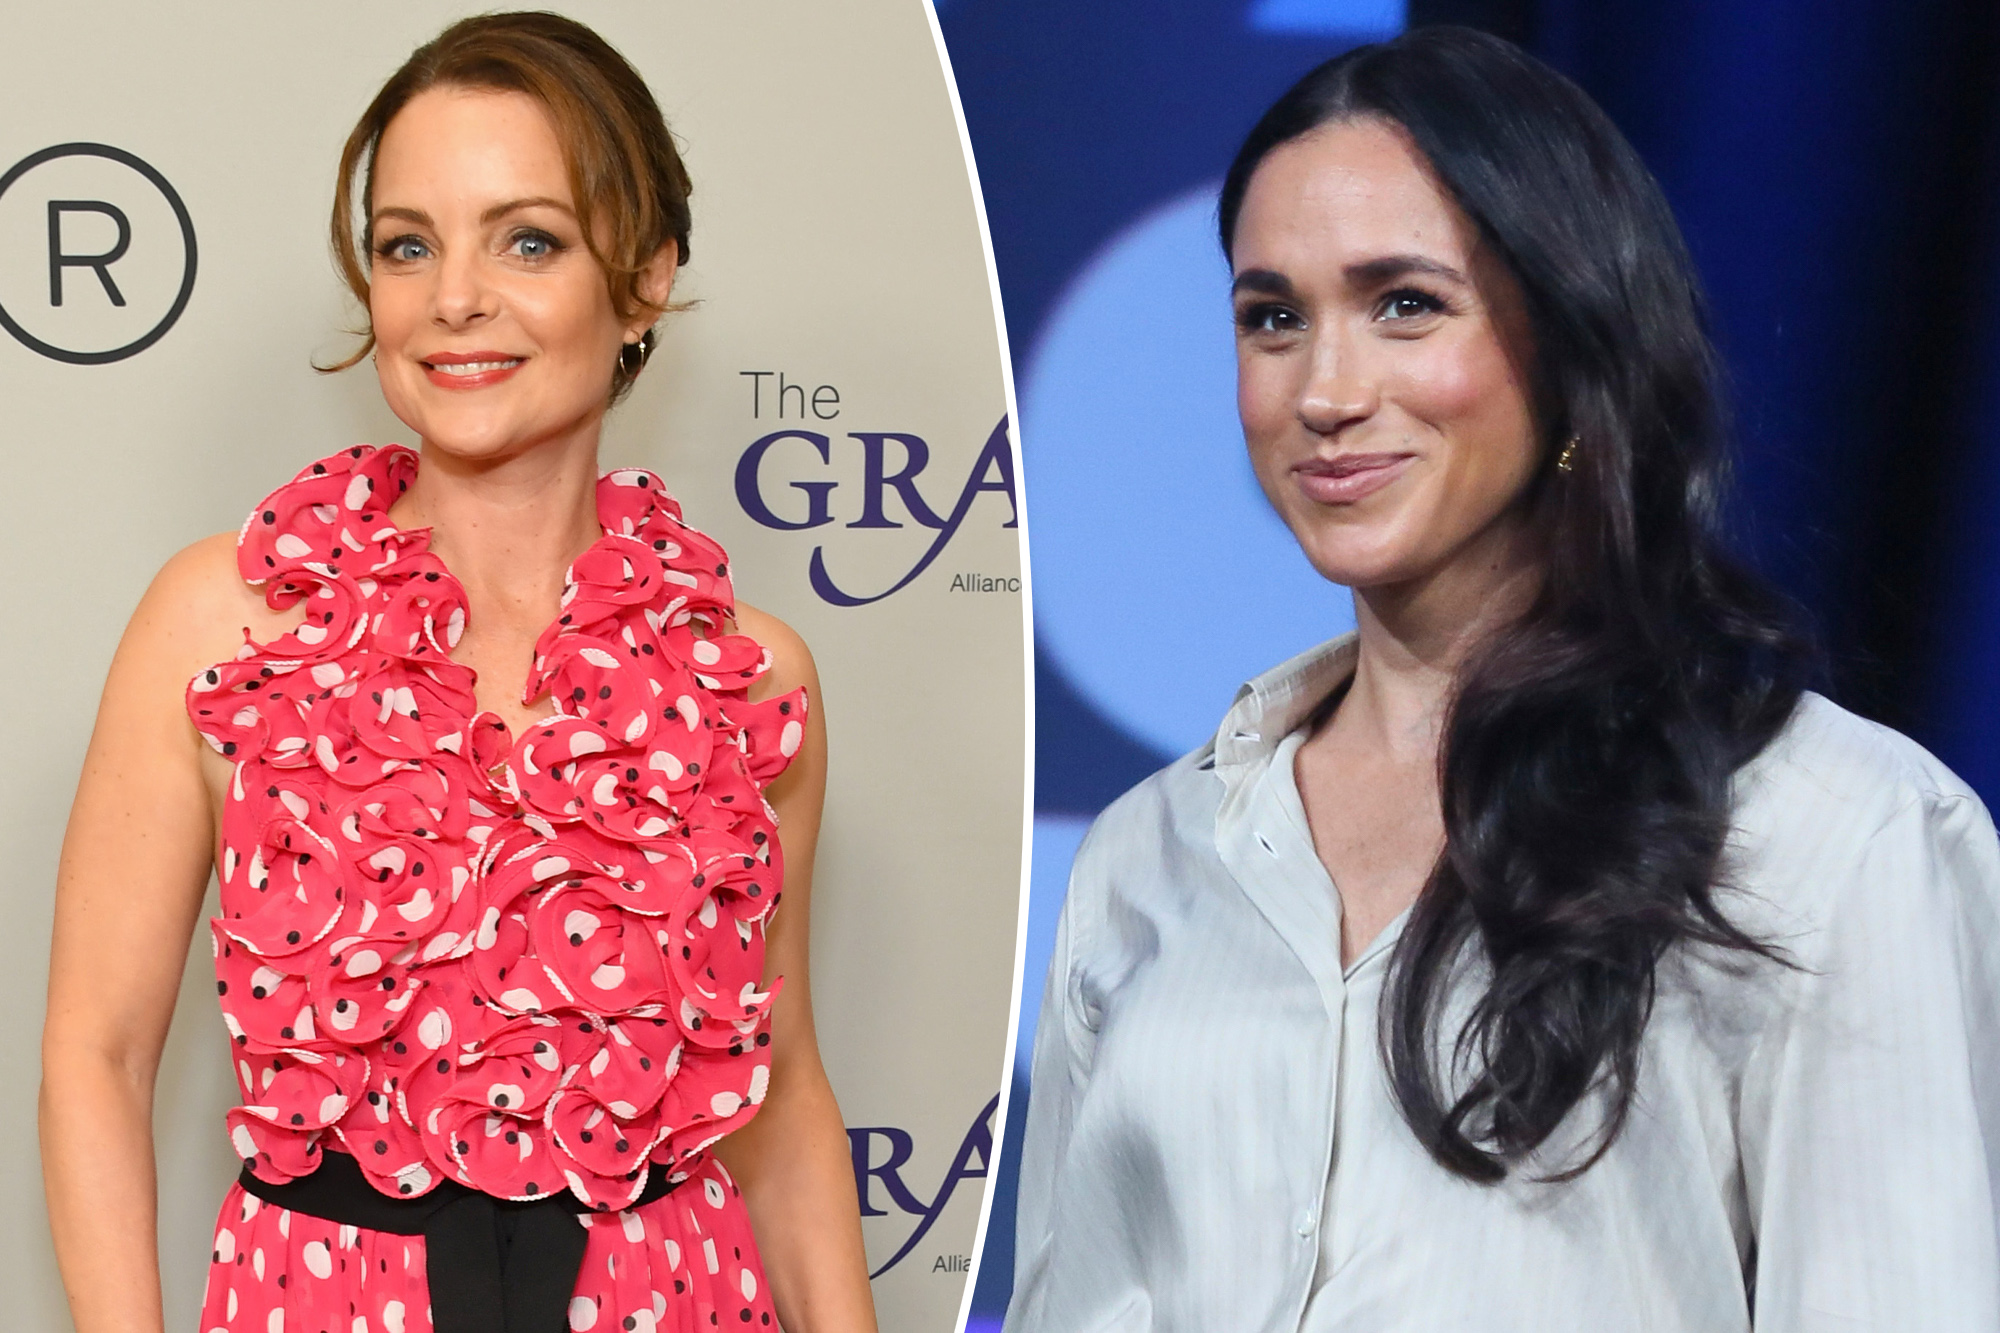 Meghan Markle's Hollywood Hangout: A New Friendship Blooms with Kimberly Williams-Paisley!